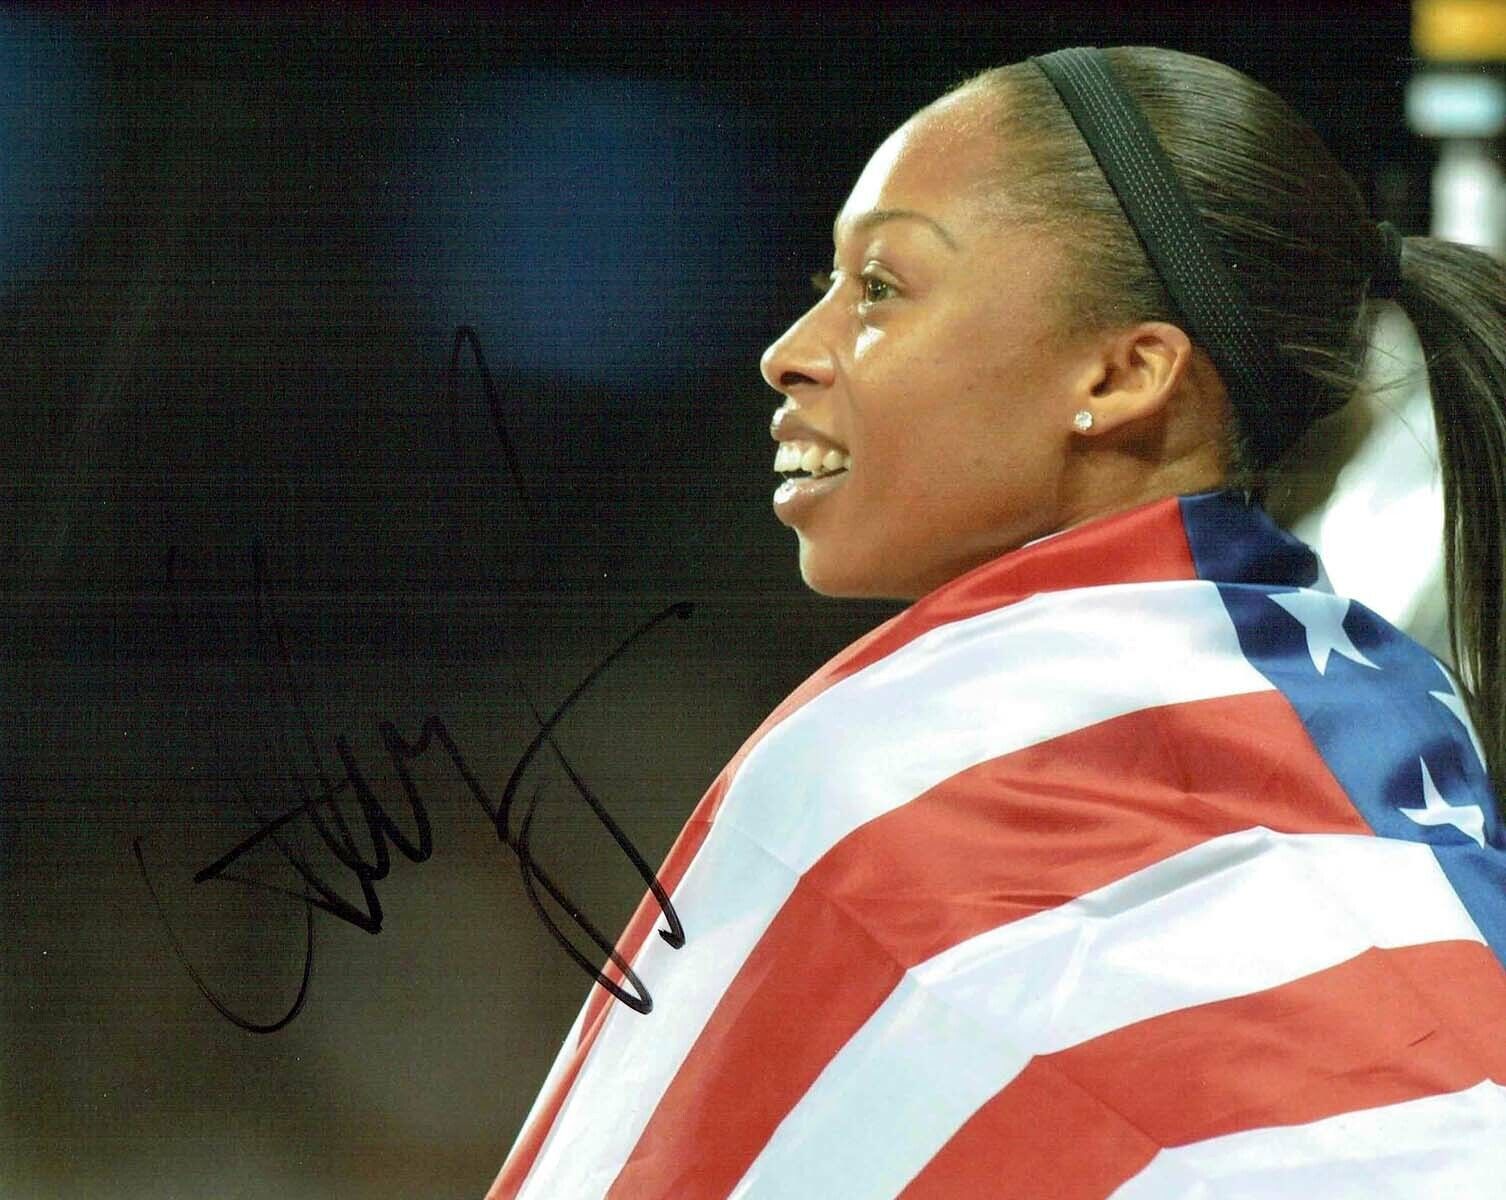 Allyson FELIX Autograph 10x8 Signed Photo Poster painting 5 AFTAL RD COA USA Athlete Gold Medal